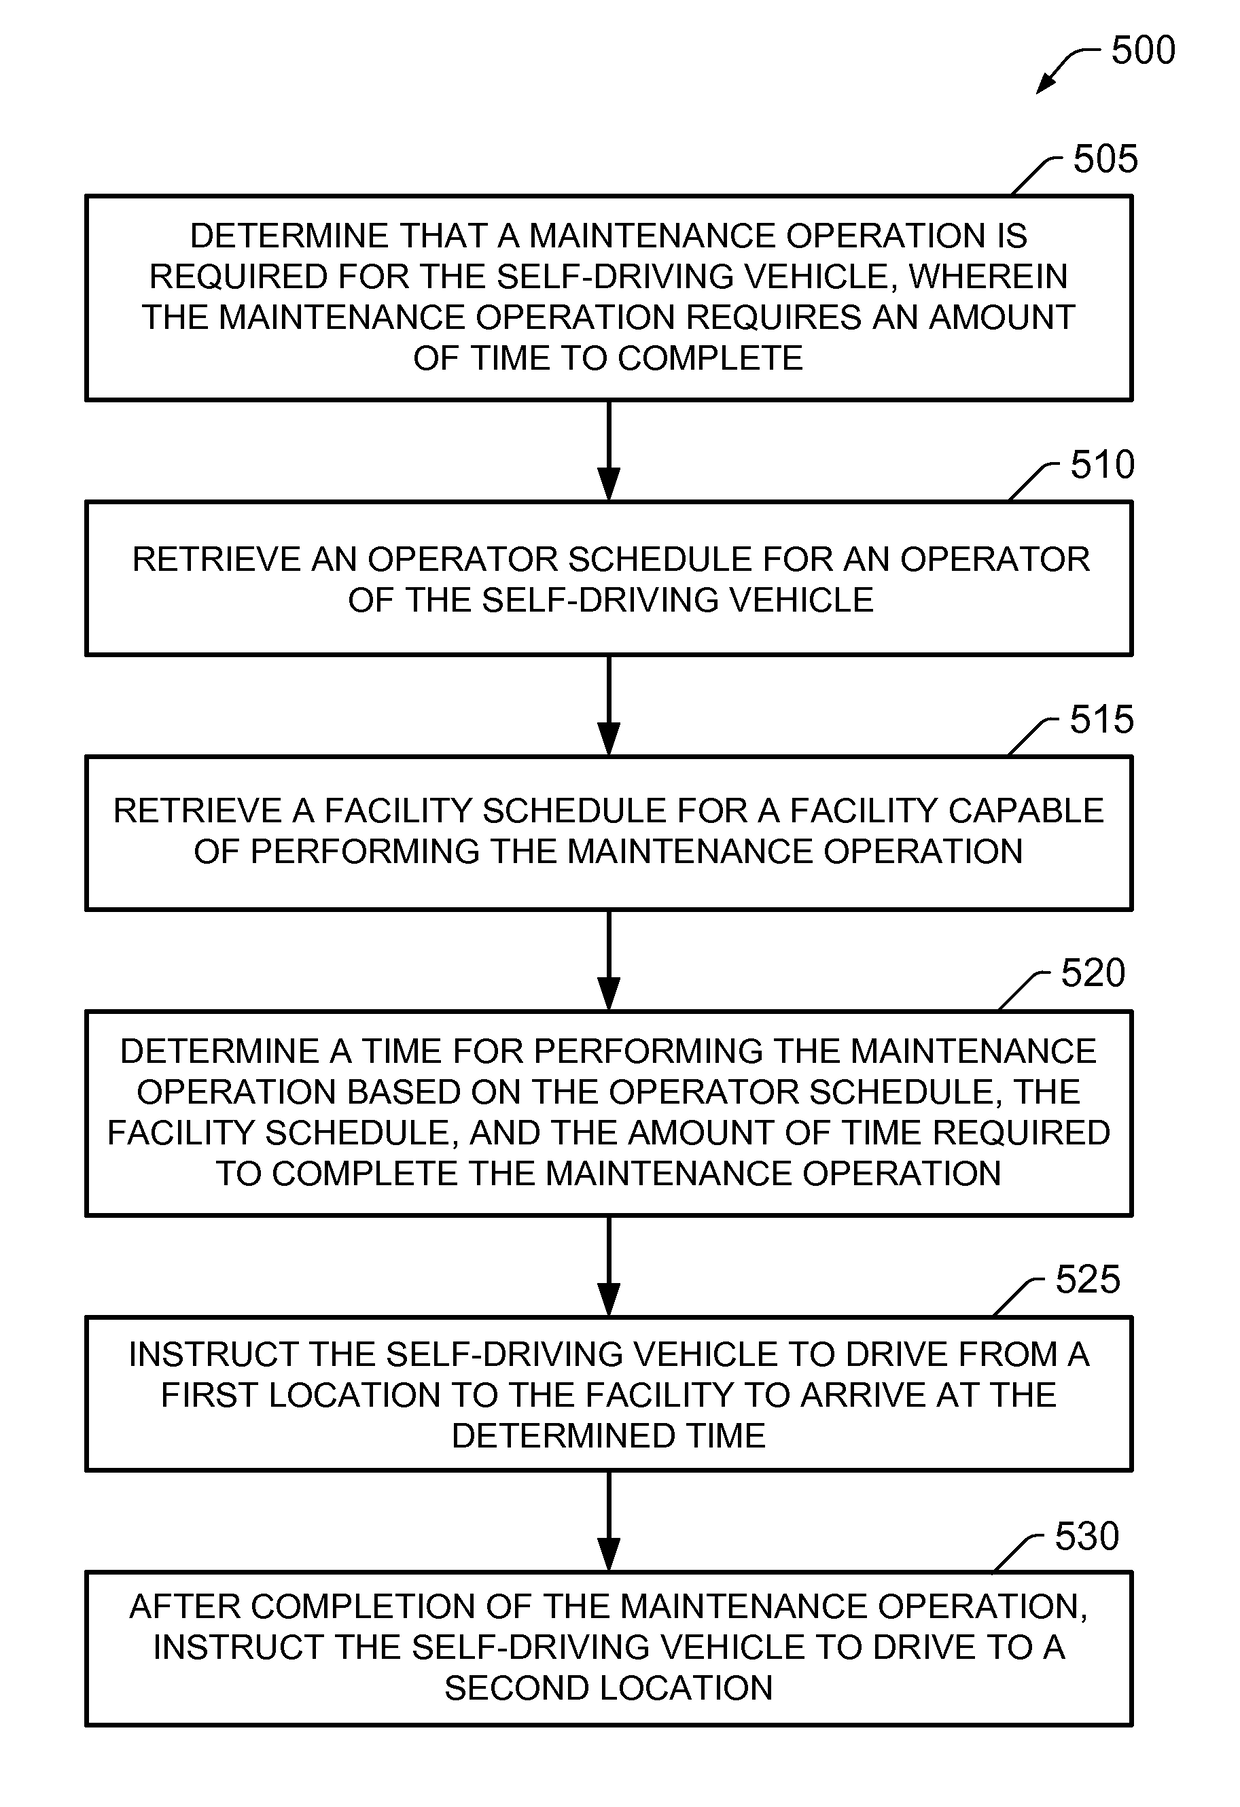 Systems and methods for maintaining a self-driving vehicle